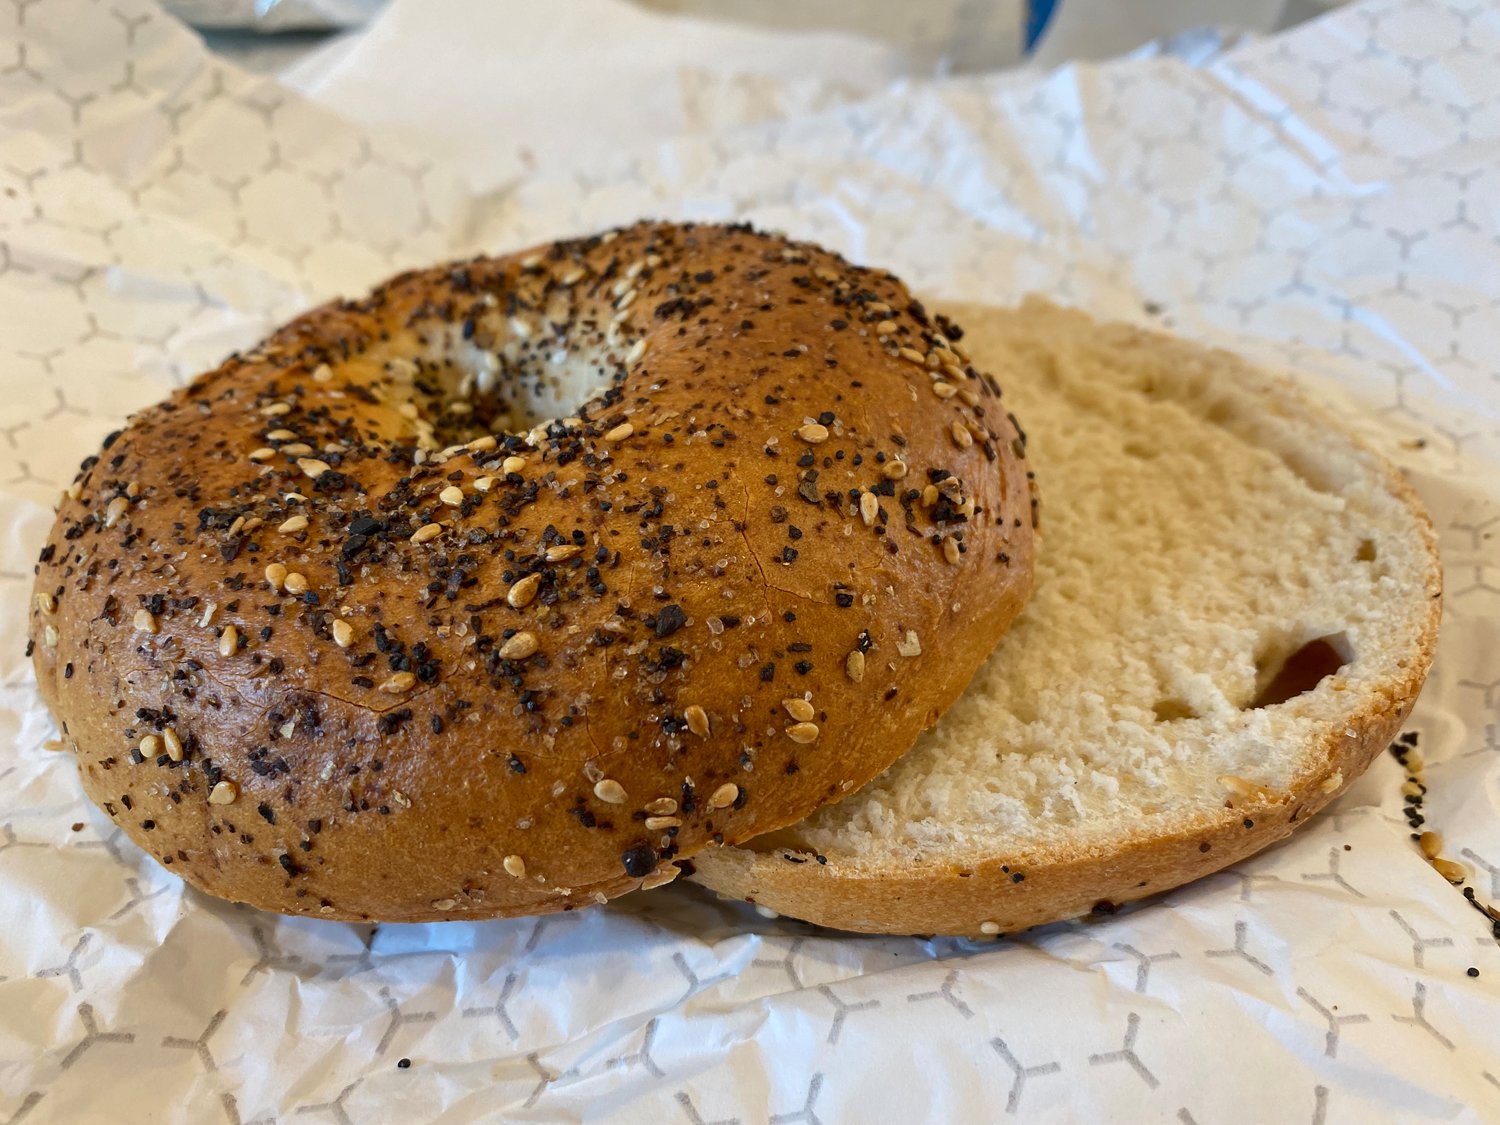 Kind Cafe Fairhope is the only bagel bakery in Fairhope. Their crunchy exterior and chewy interior is everything you want in a bagel.